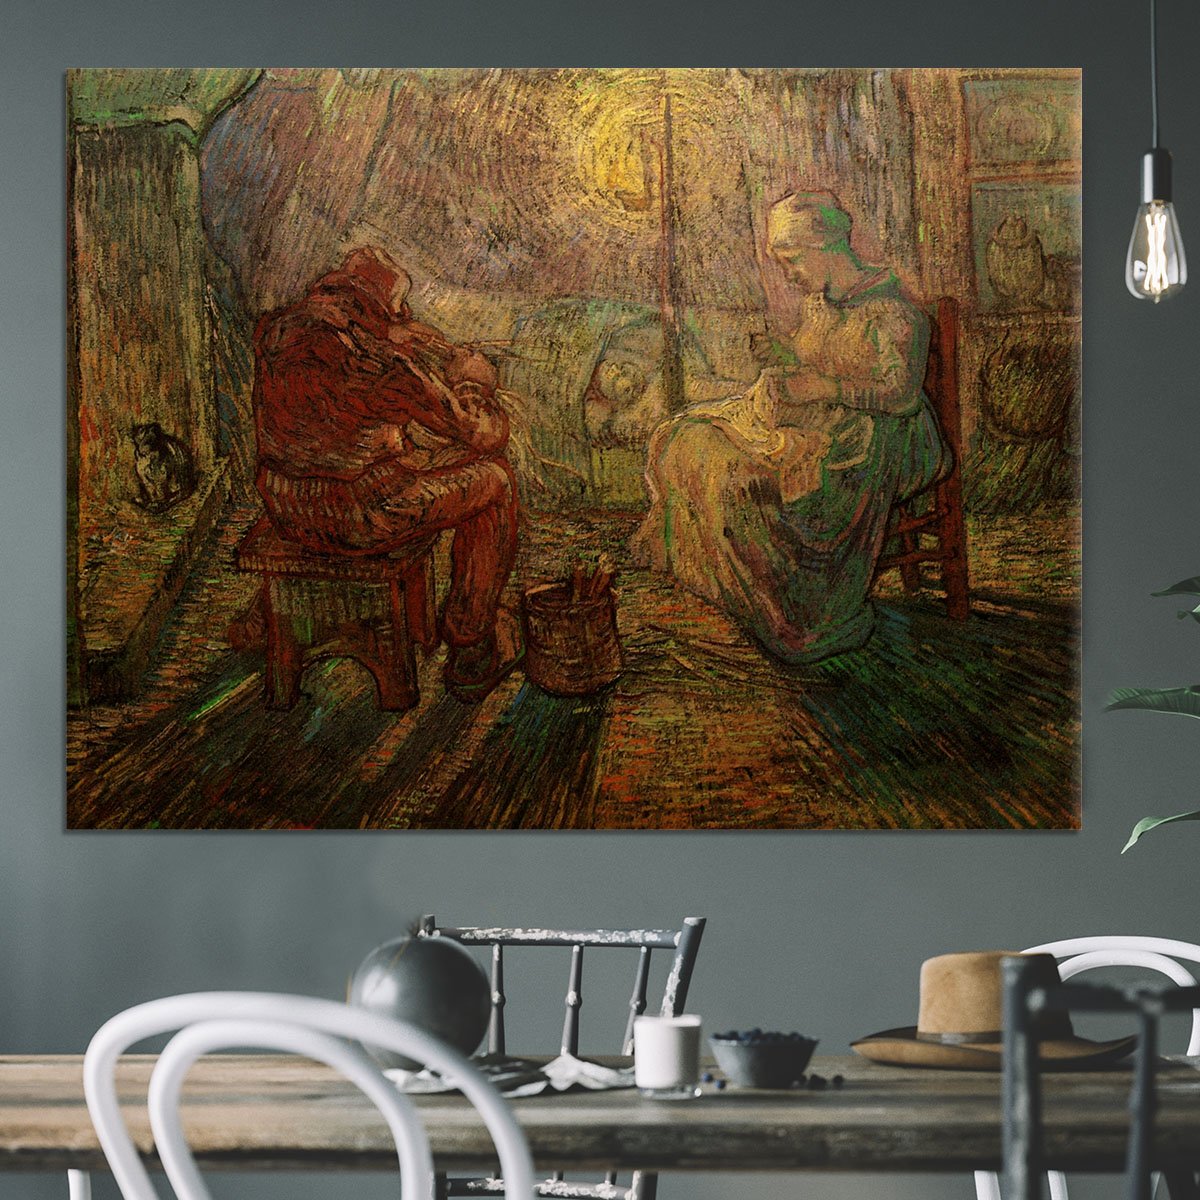 Evening The Watch after Millet by Van Gogh Canvas Print or Poster